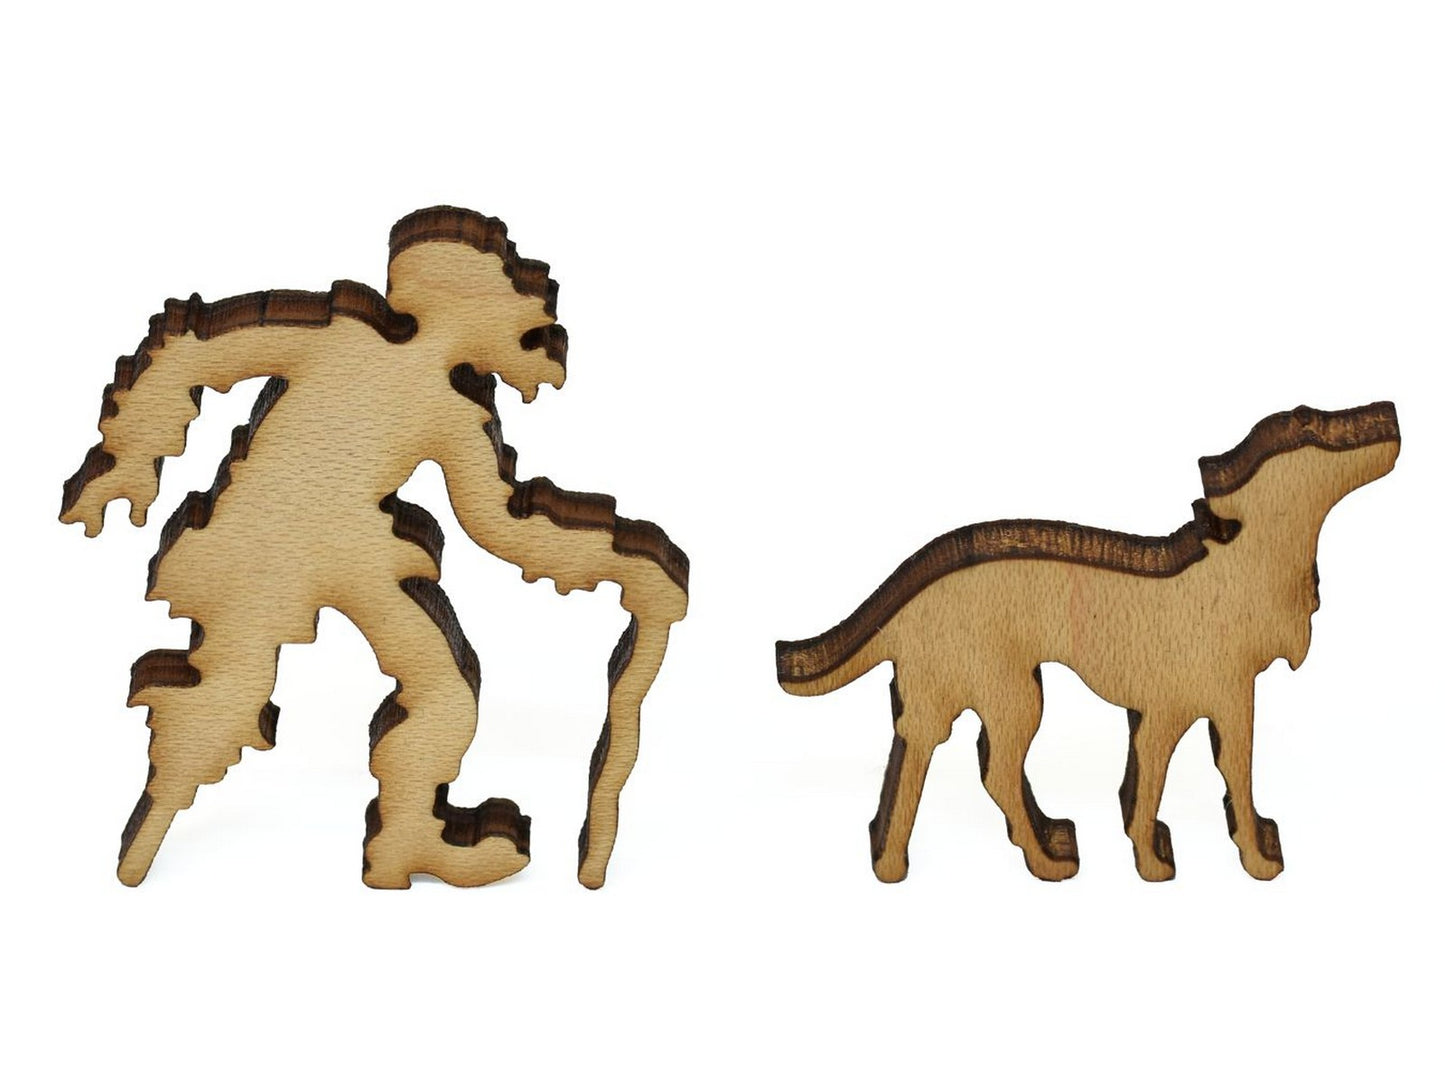 A closeup of pieces showing a man with a peg-leg walking his dog.